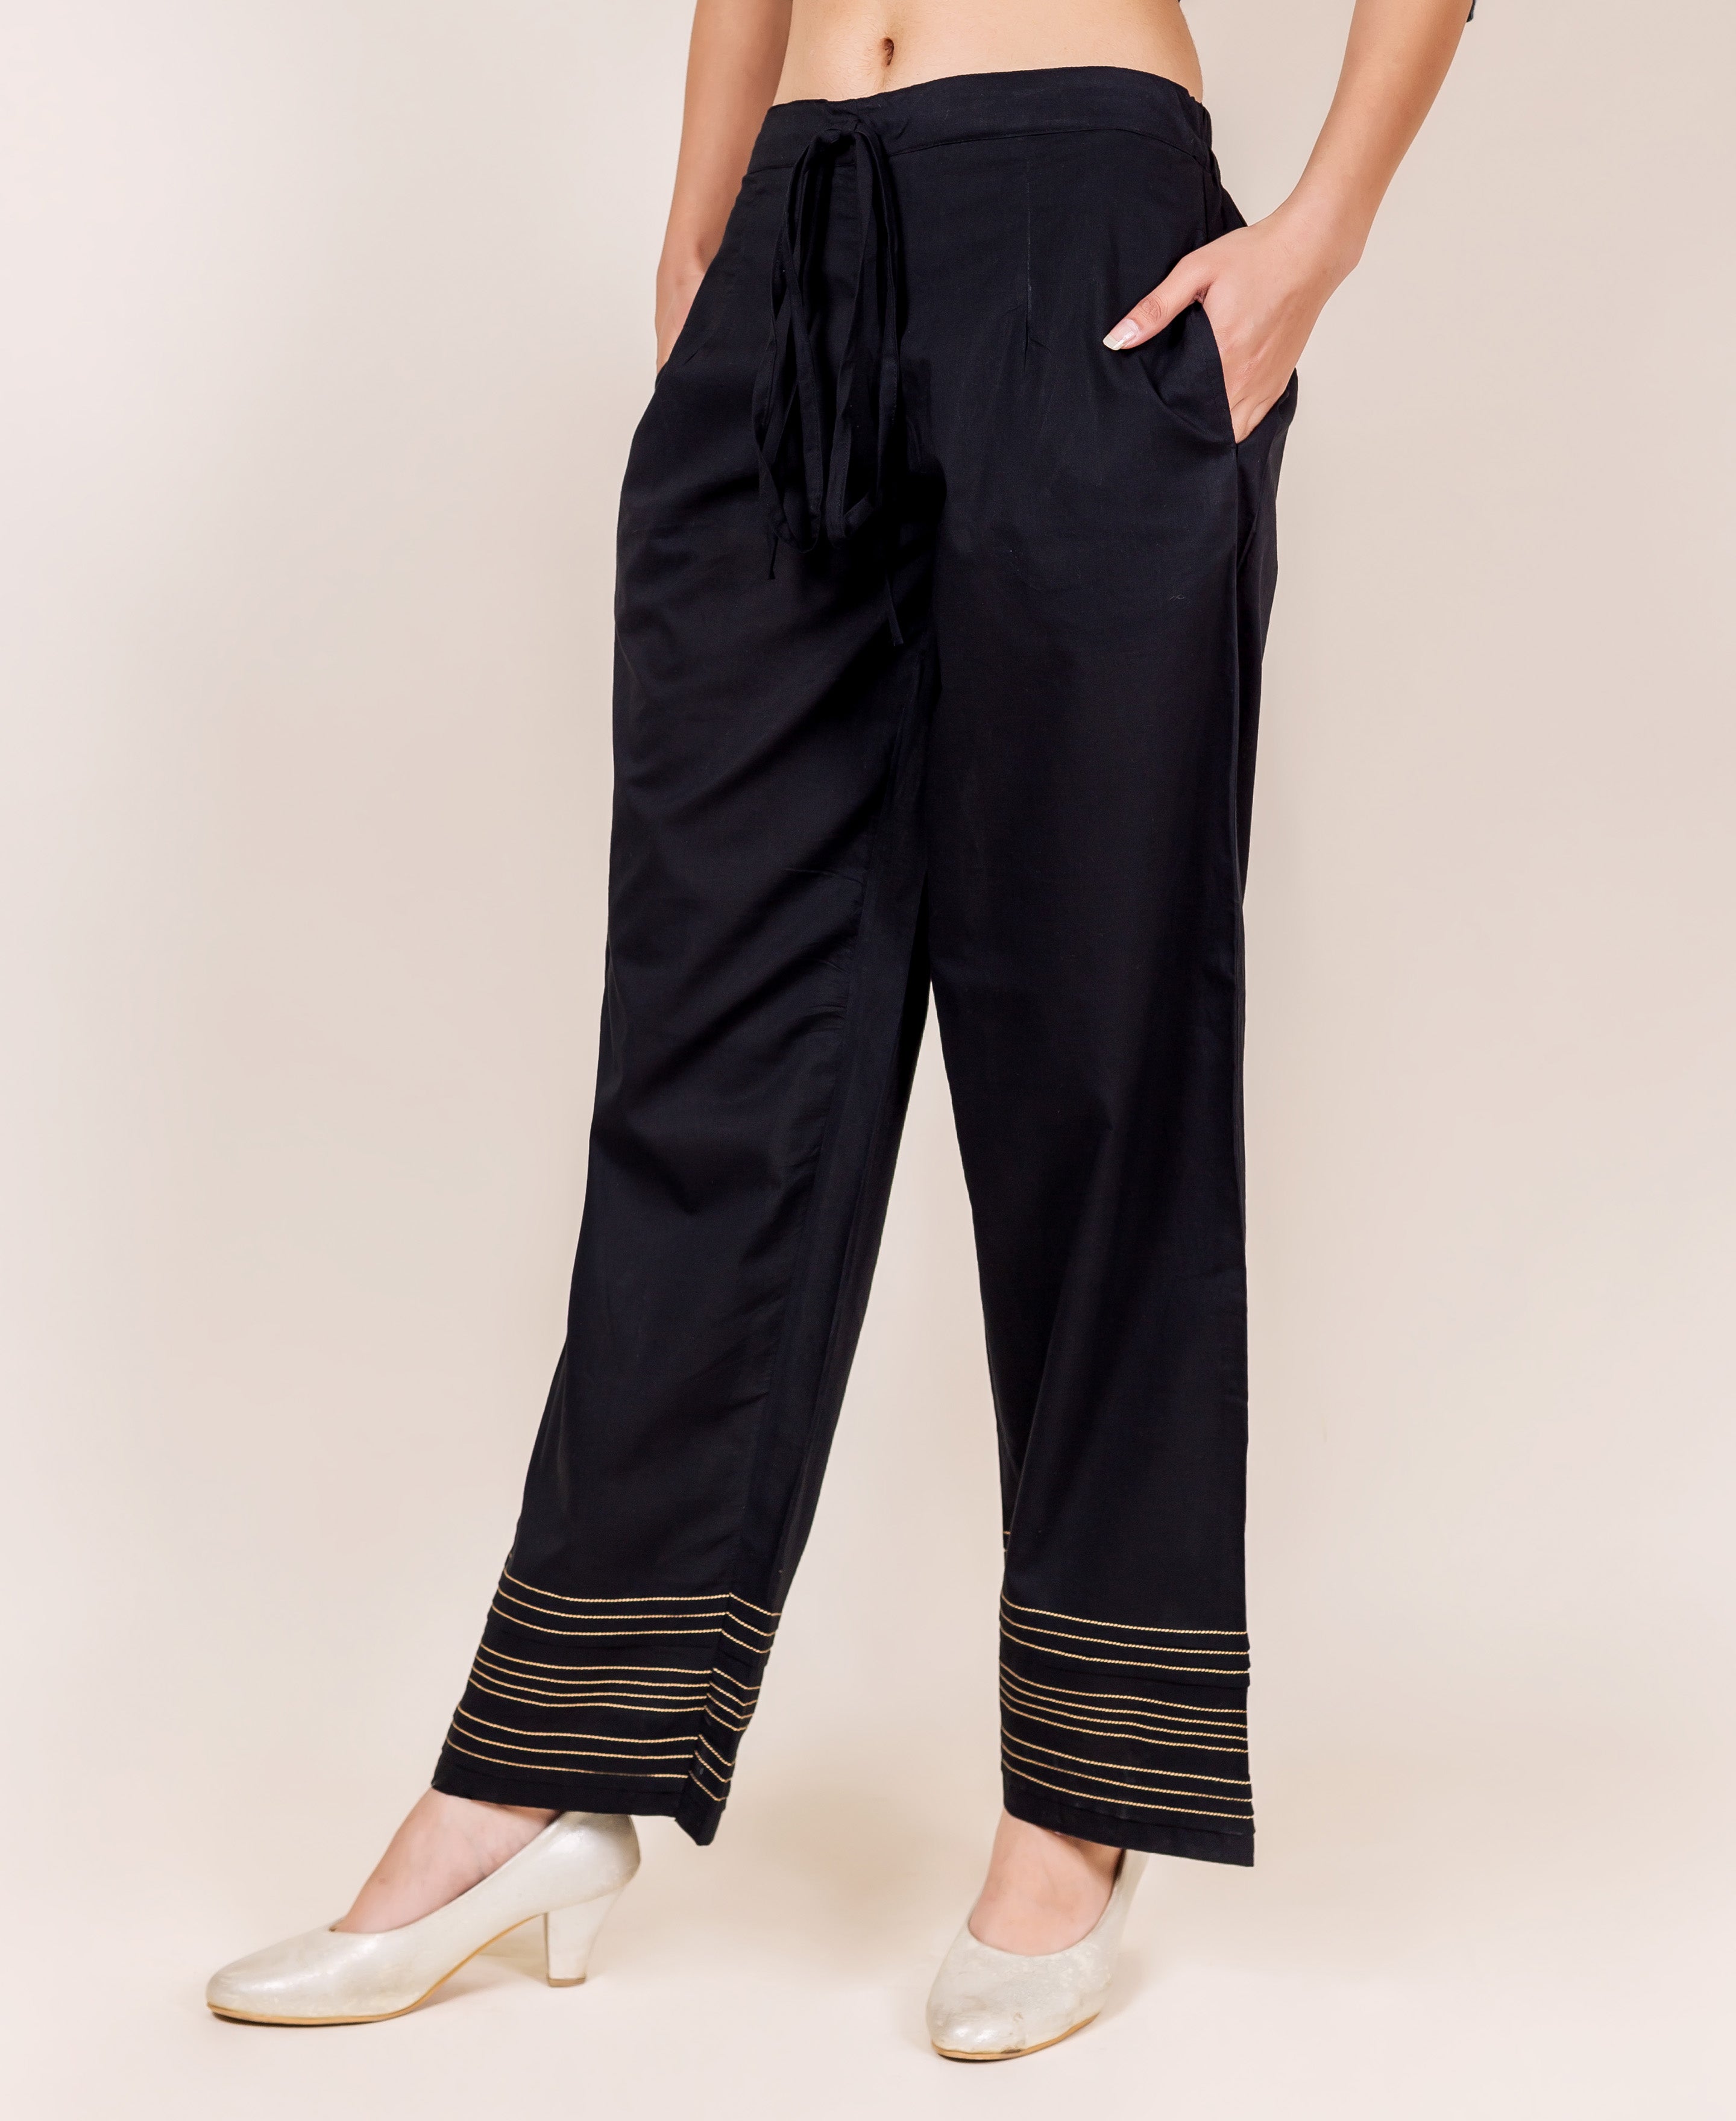 Buy Wear Affair Zurich Imported Fabric Stretchable Bell Bottom Lycra Stripes  Palazzo Pants for Women. (Black & Grey, L) at Amazon.in